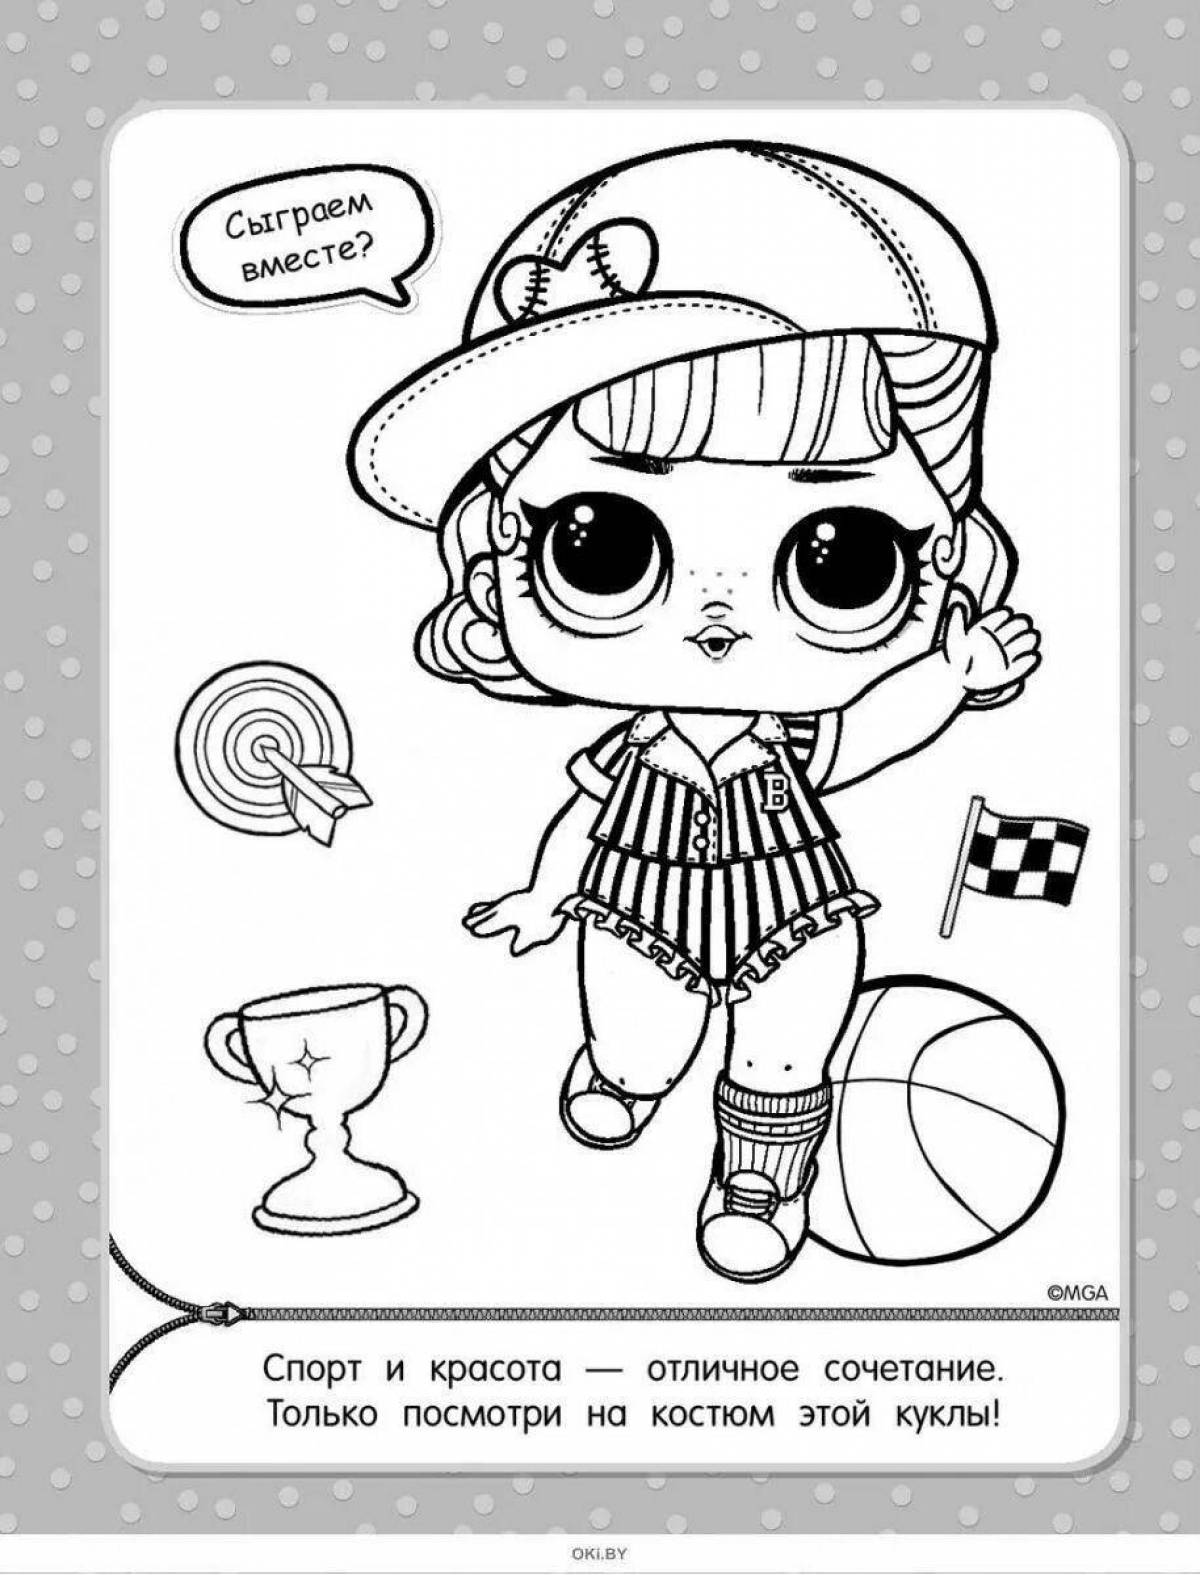 Cute accessories for coloring lol